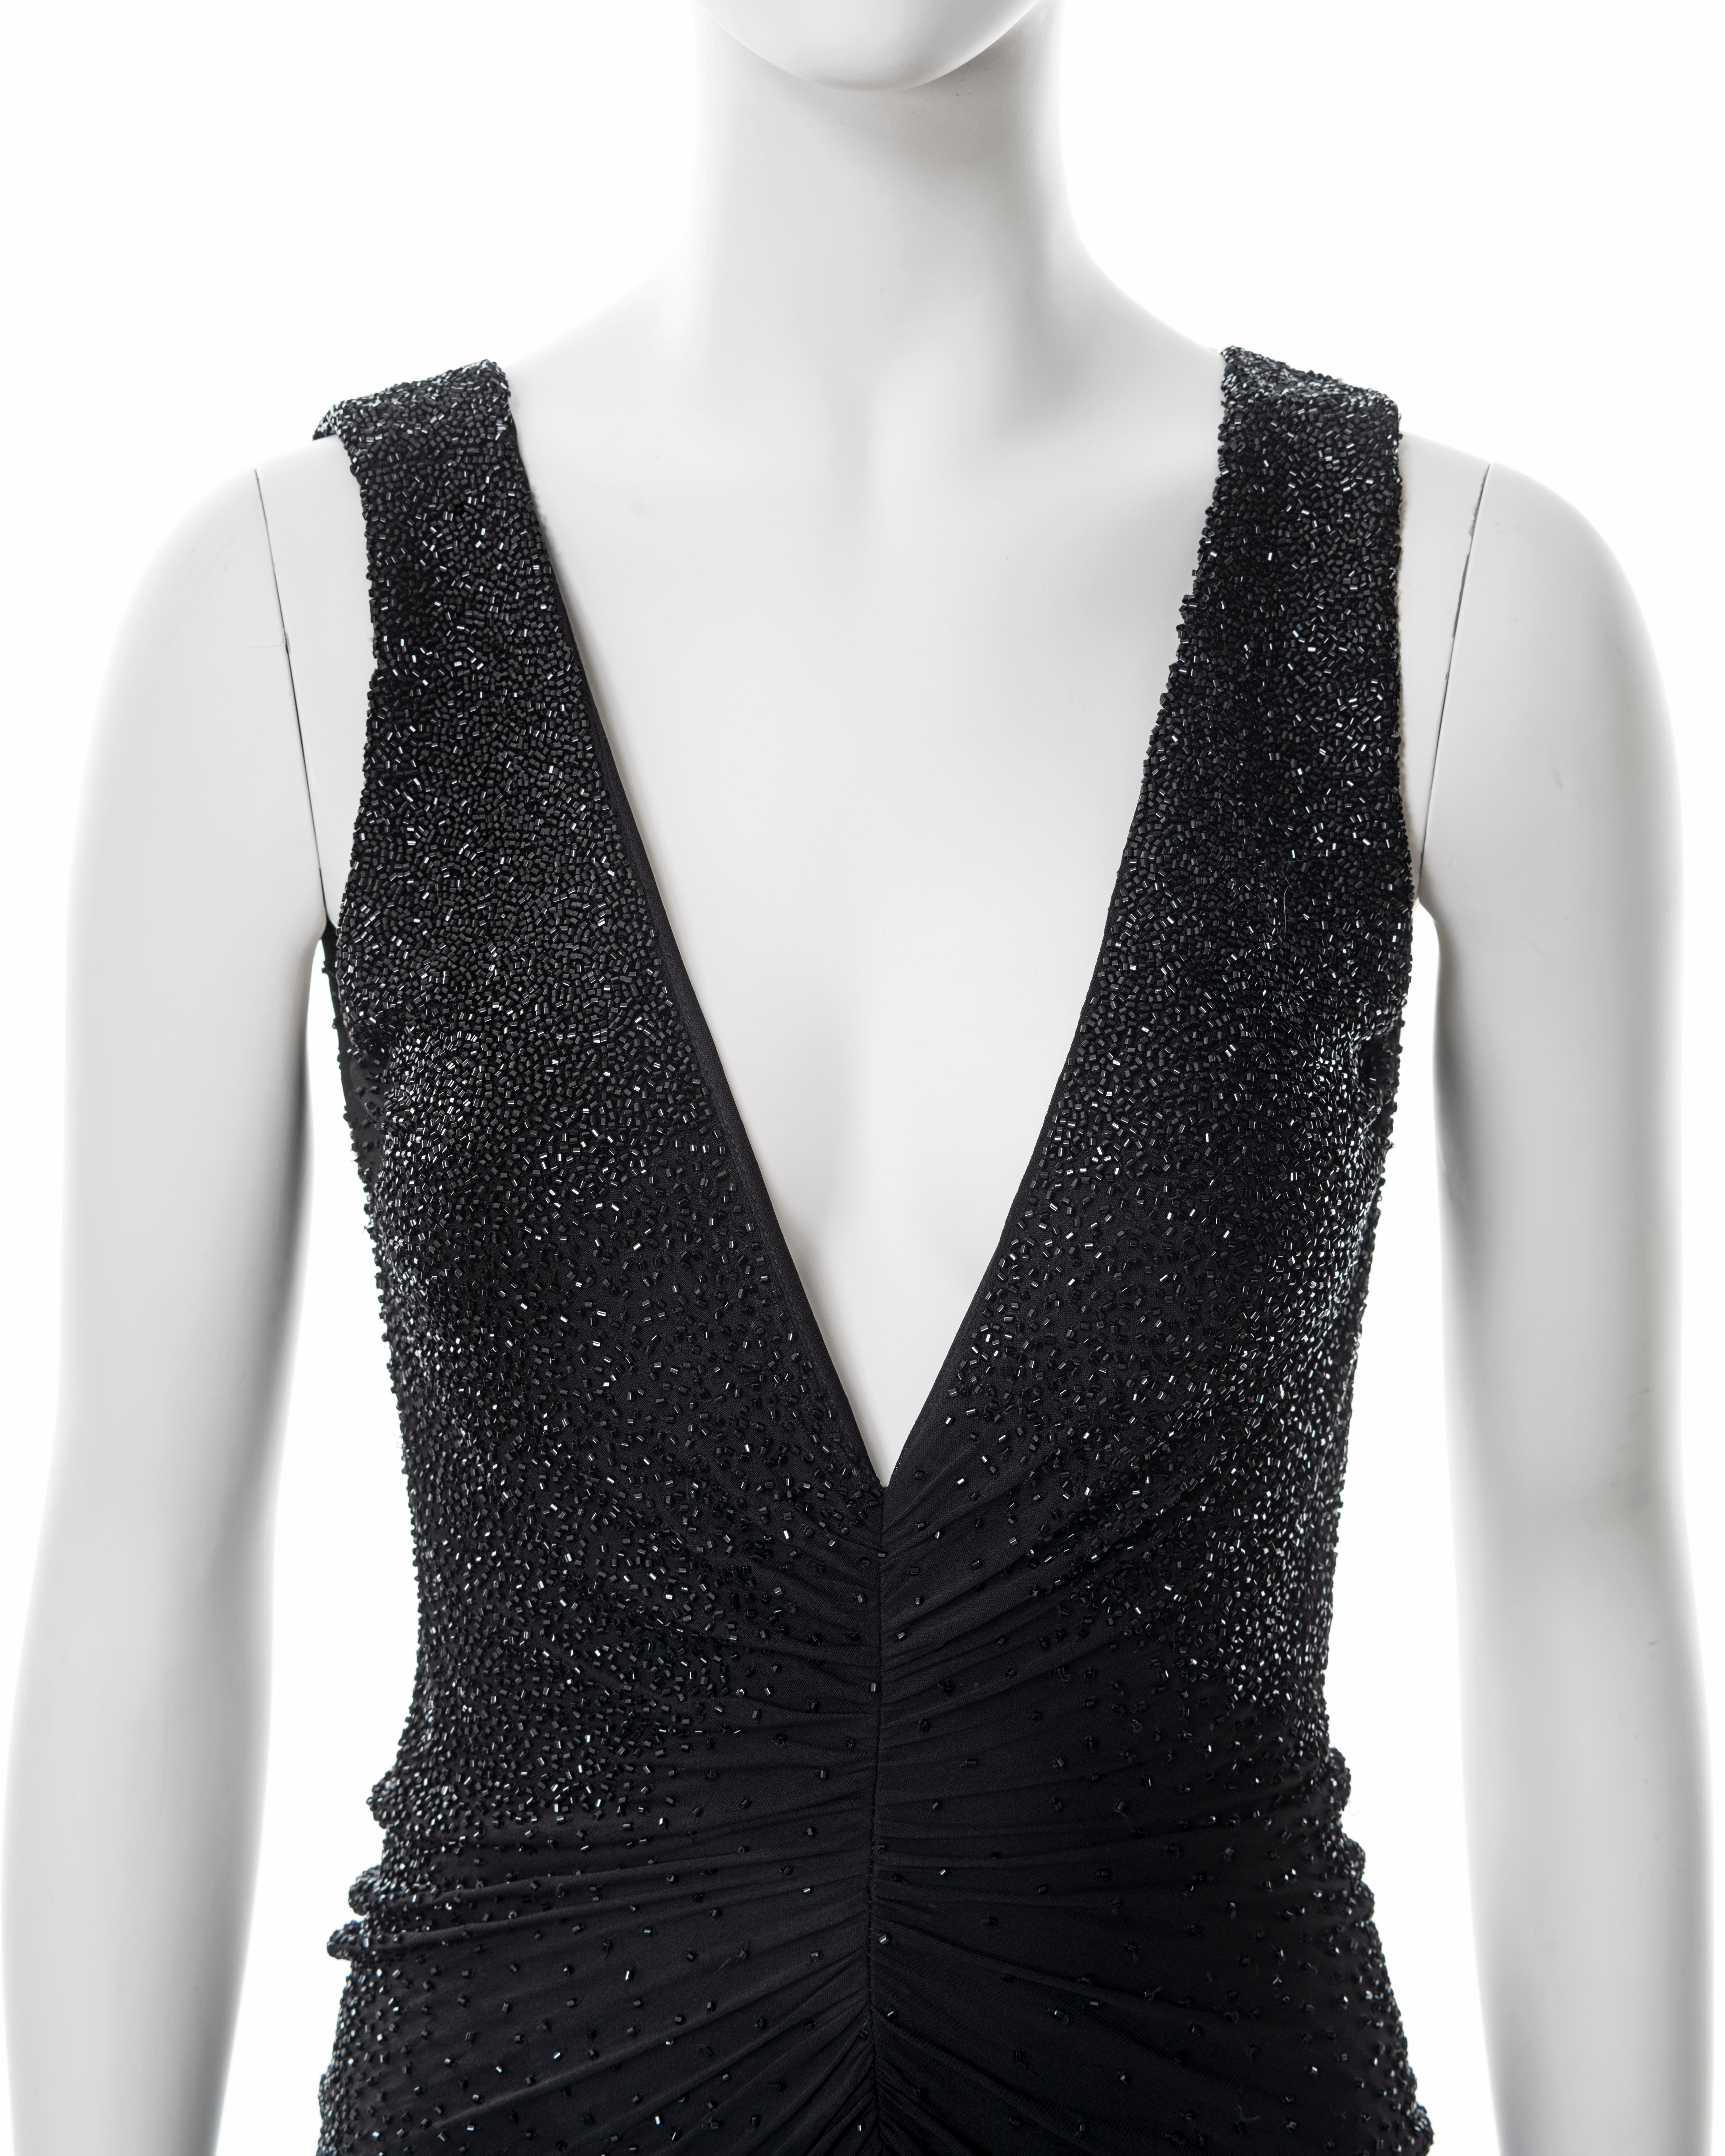 Ralph Lauren black hand beaded evening dress, fw 2013 In Excellent Condition For Sale In London, GB